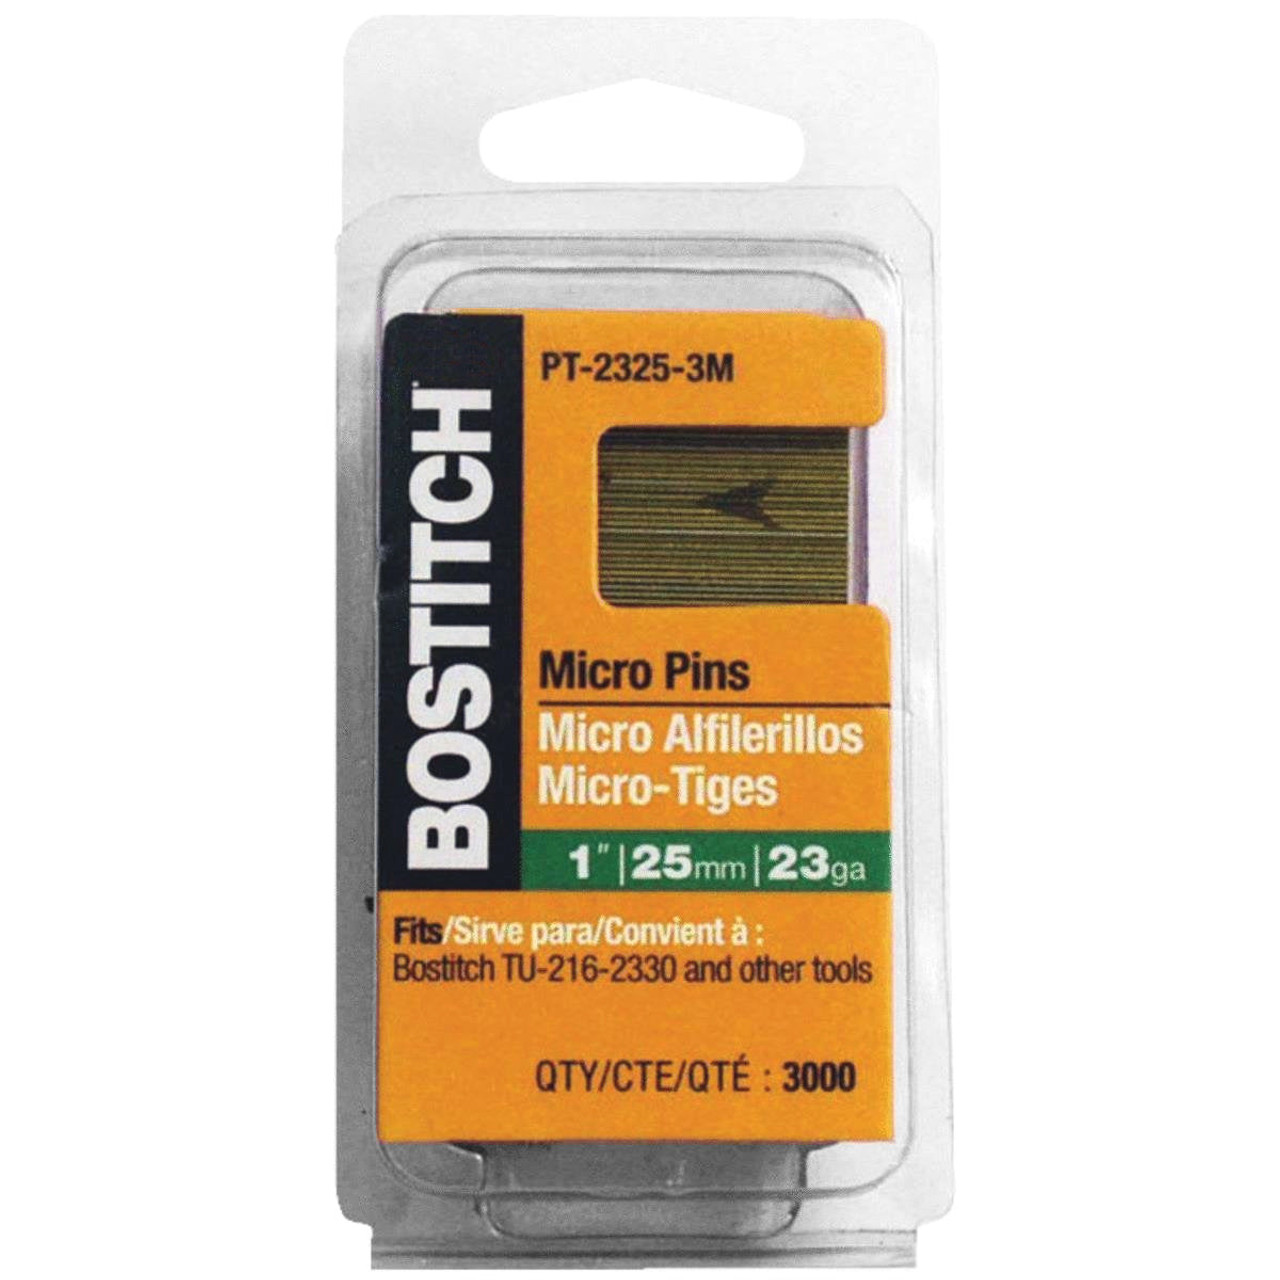 BOSTITCH 1" X 23 Gauge Stainless Steel Headless Pins With Diamond Point